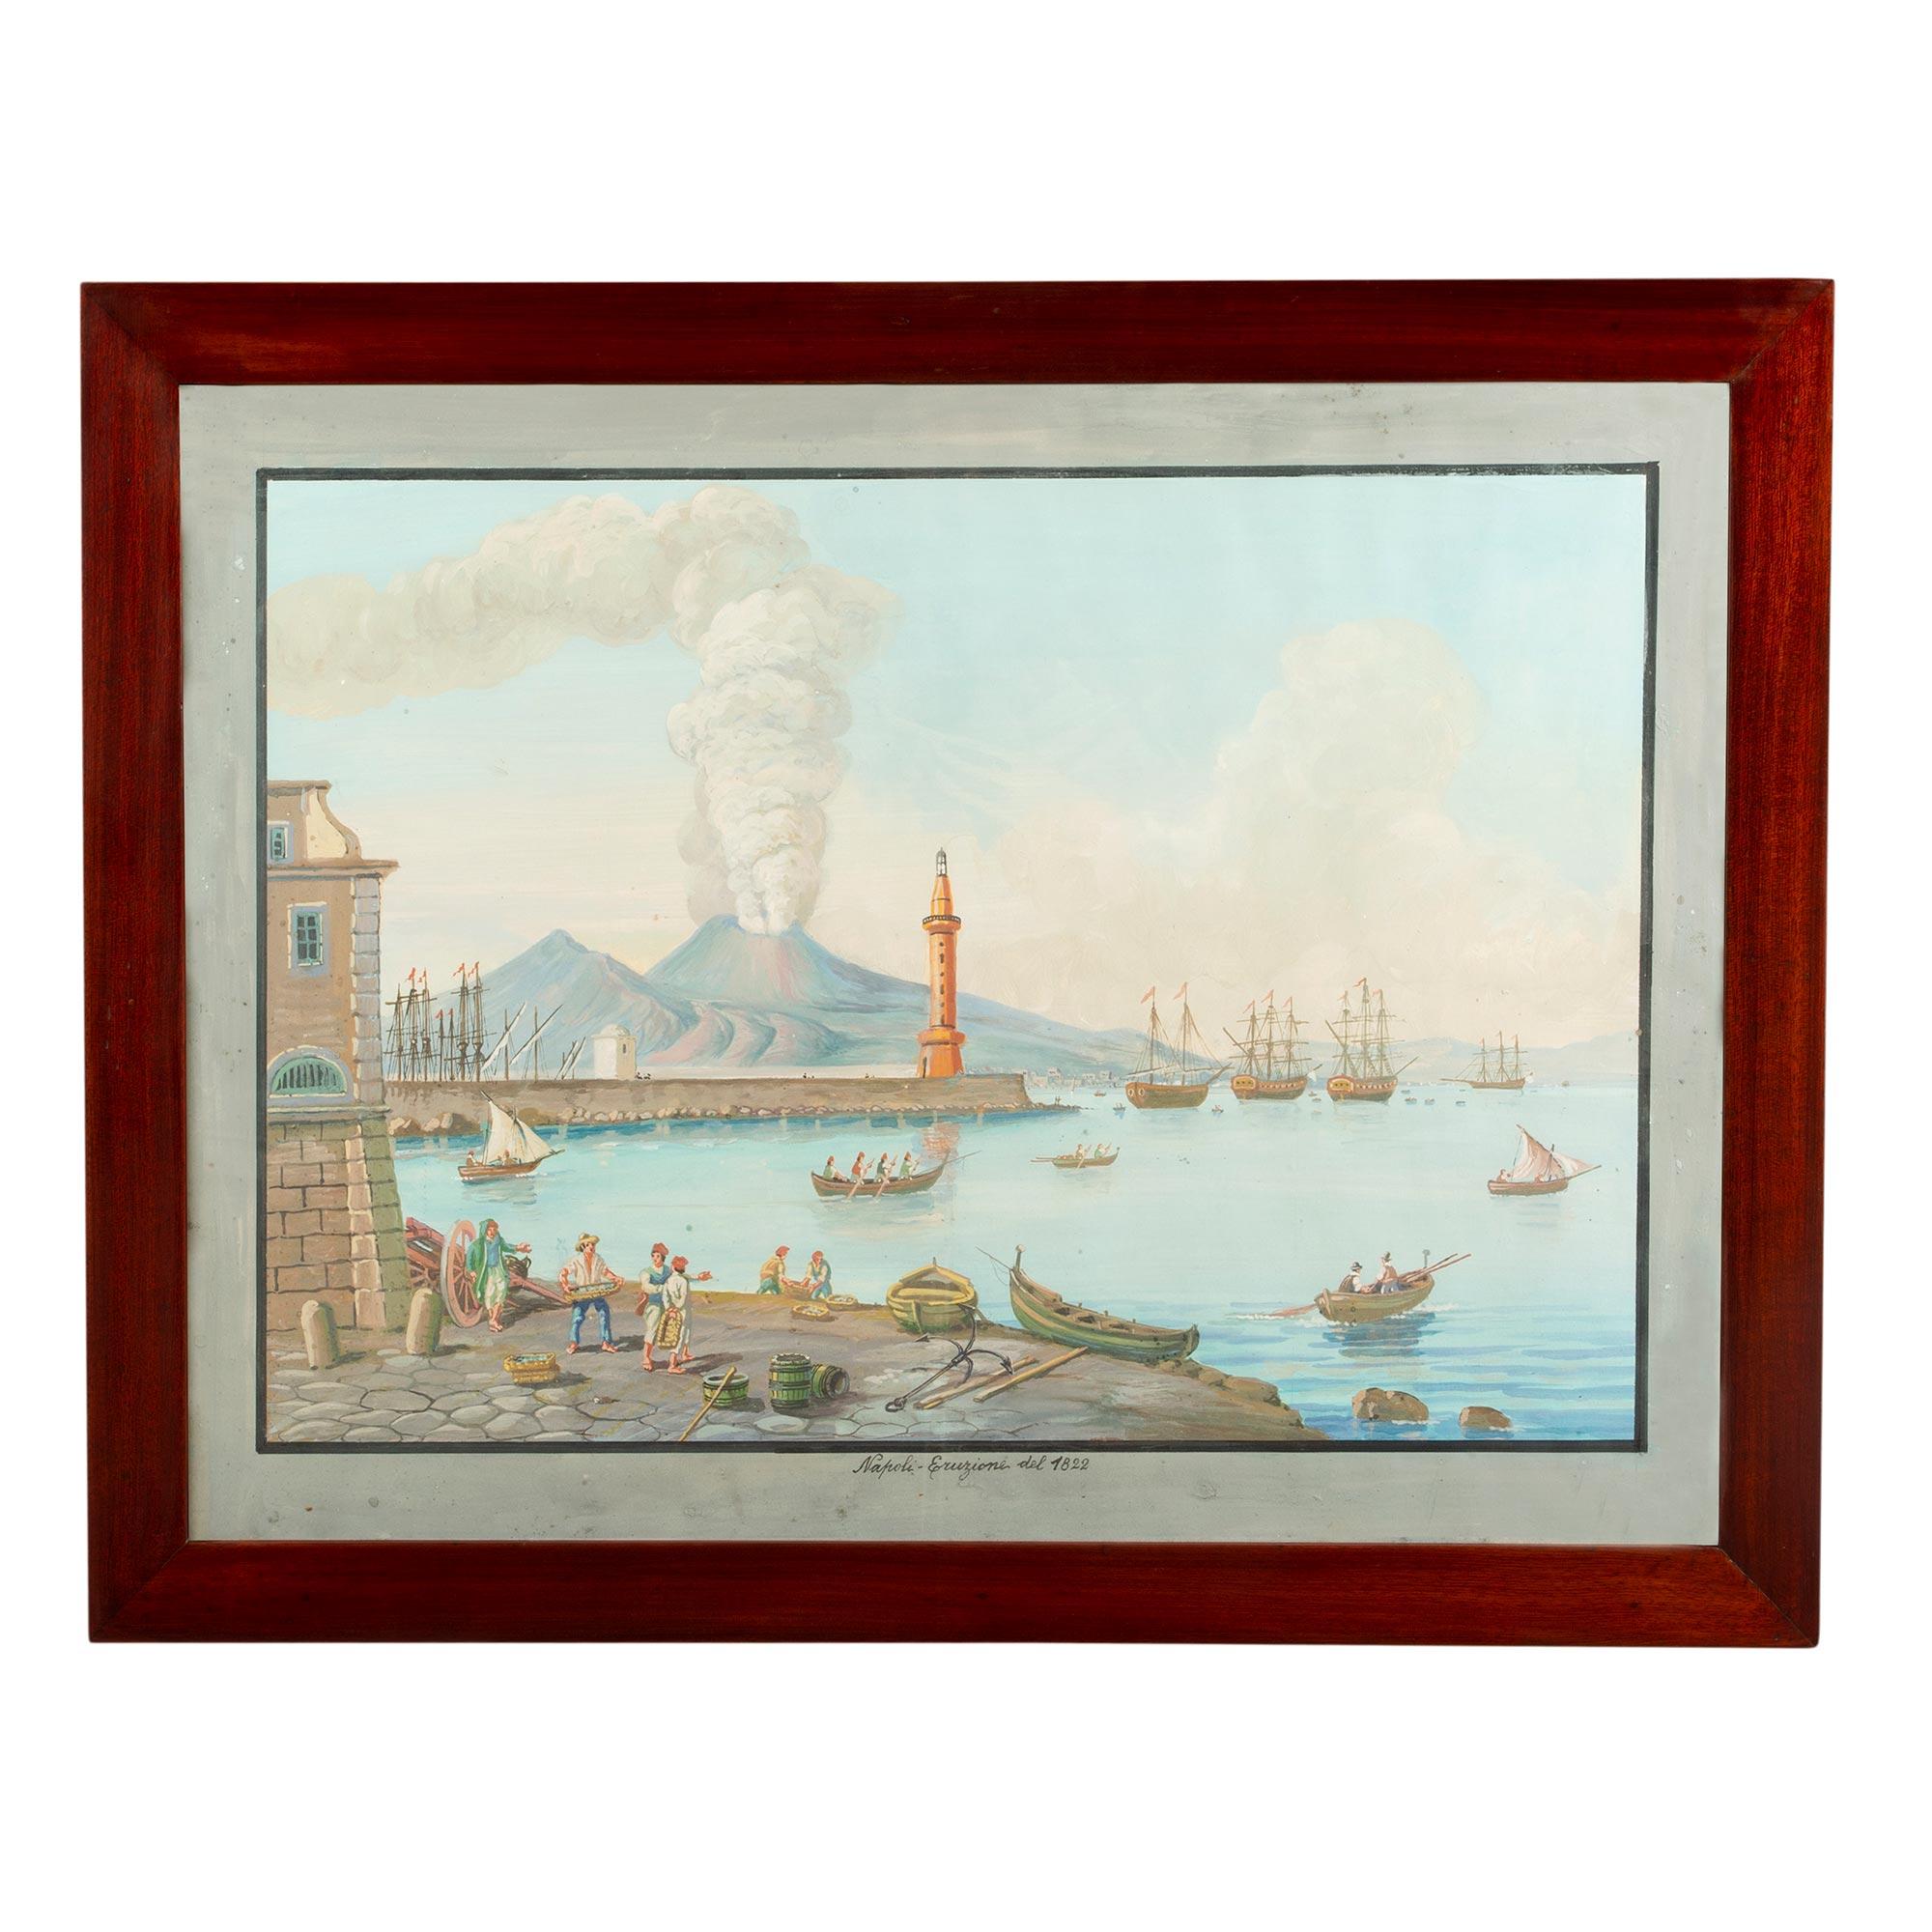 Pair of Italian 18th Century Neapolitan Gouaches in 19th Century Mahogany Frame In Good Condition For Sale In West Palm Beach, FL